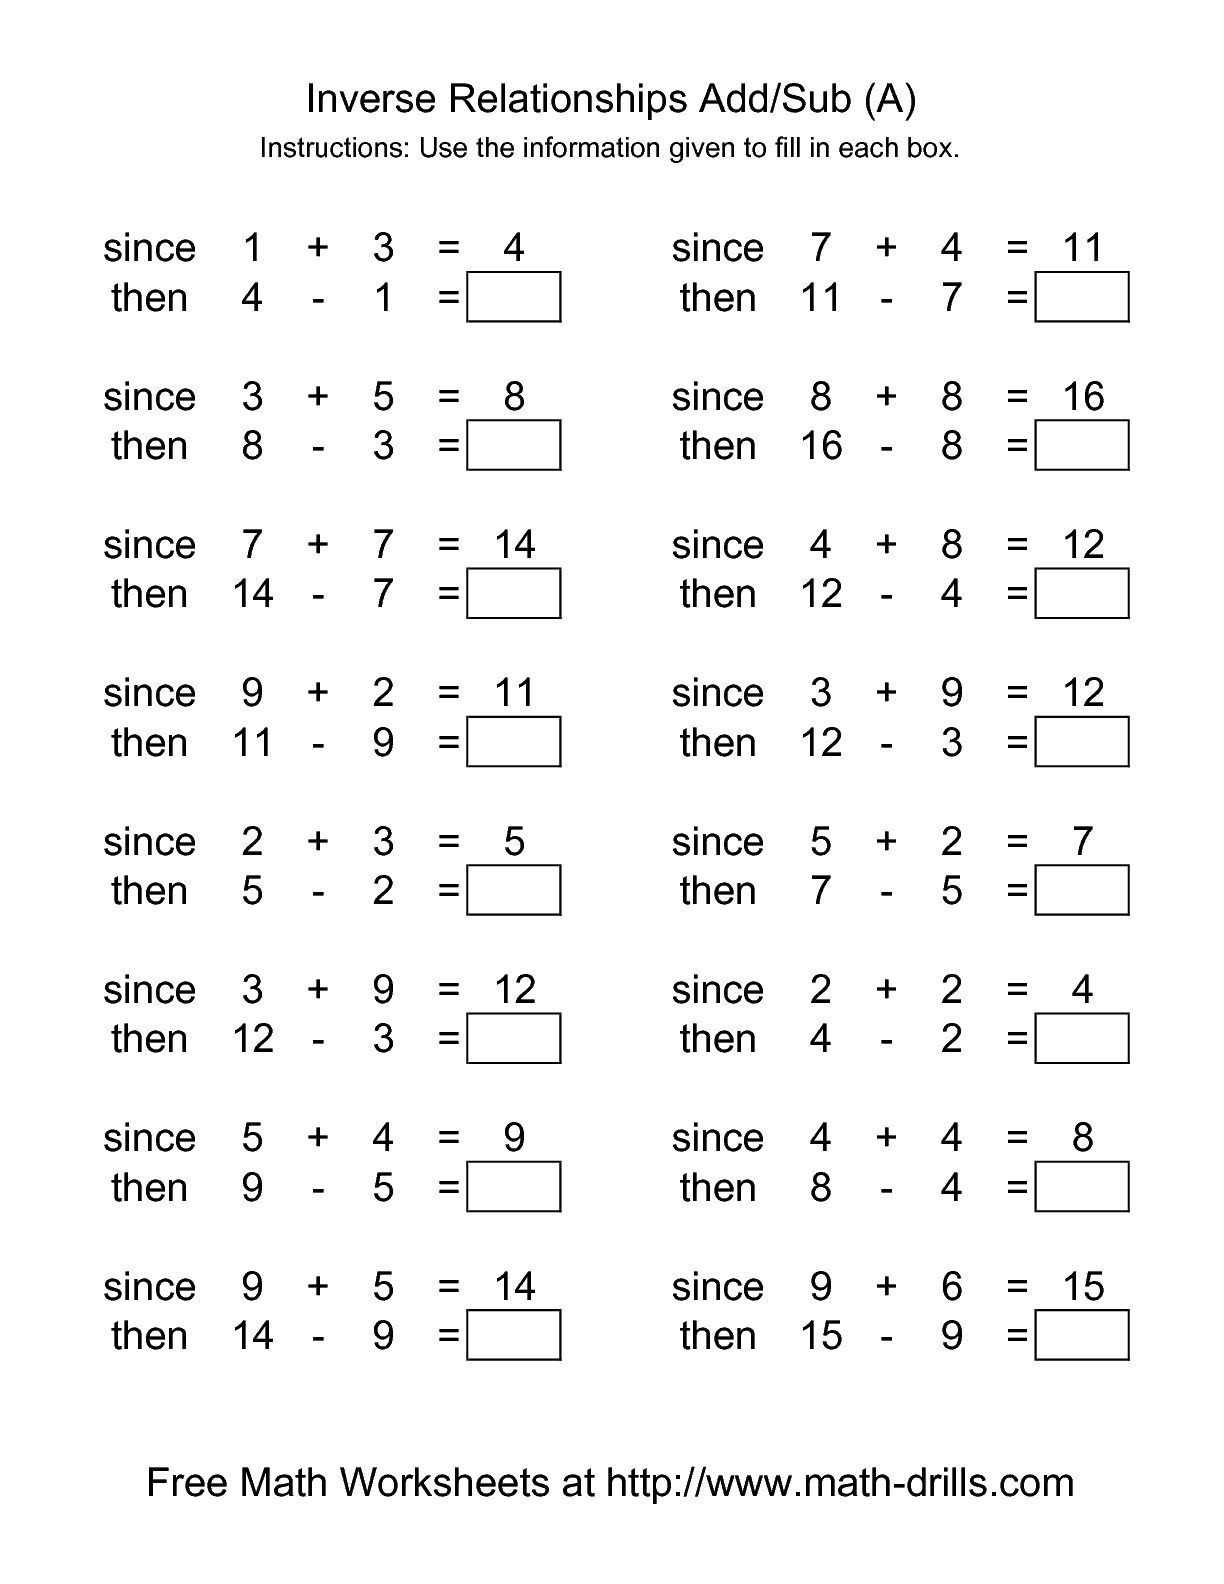 Inverse Functions Worksheet Answer Key as Well as Worksheet Position Functions Gallery Worksheet for Kids